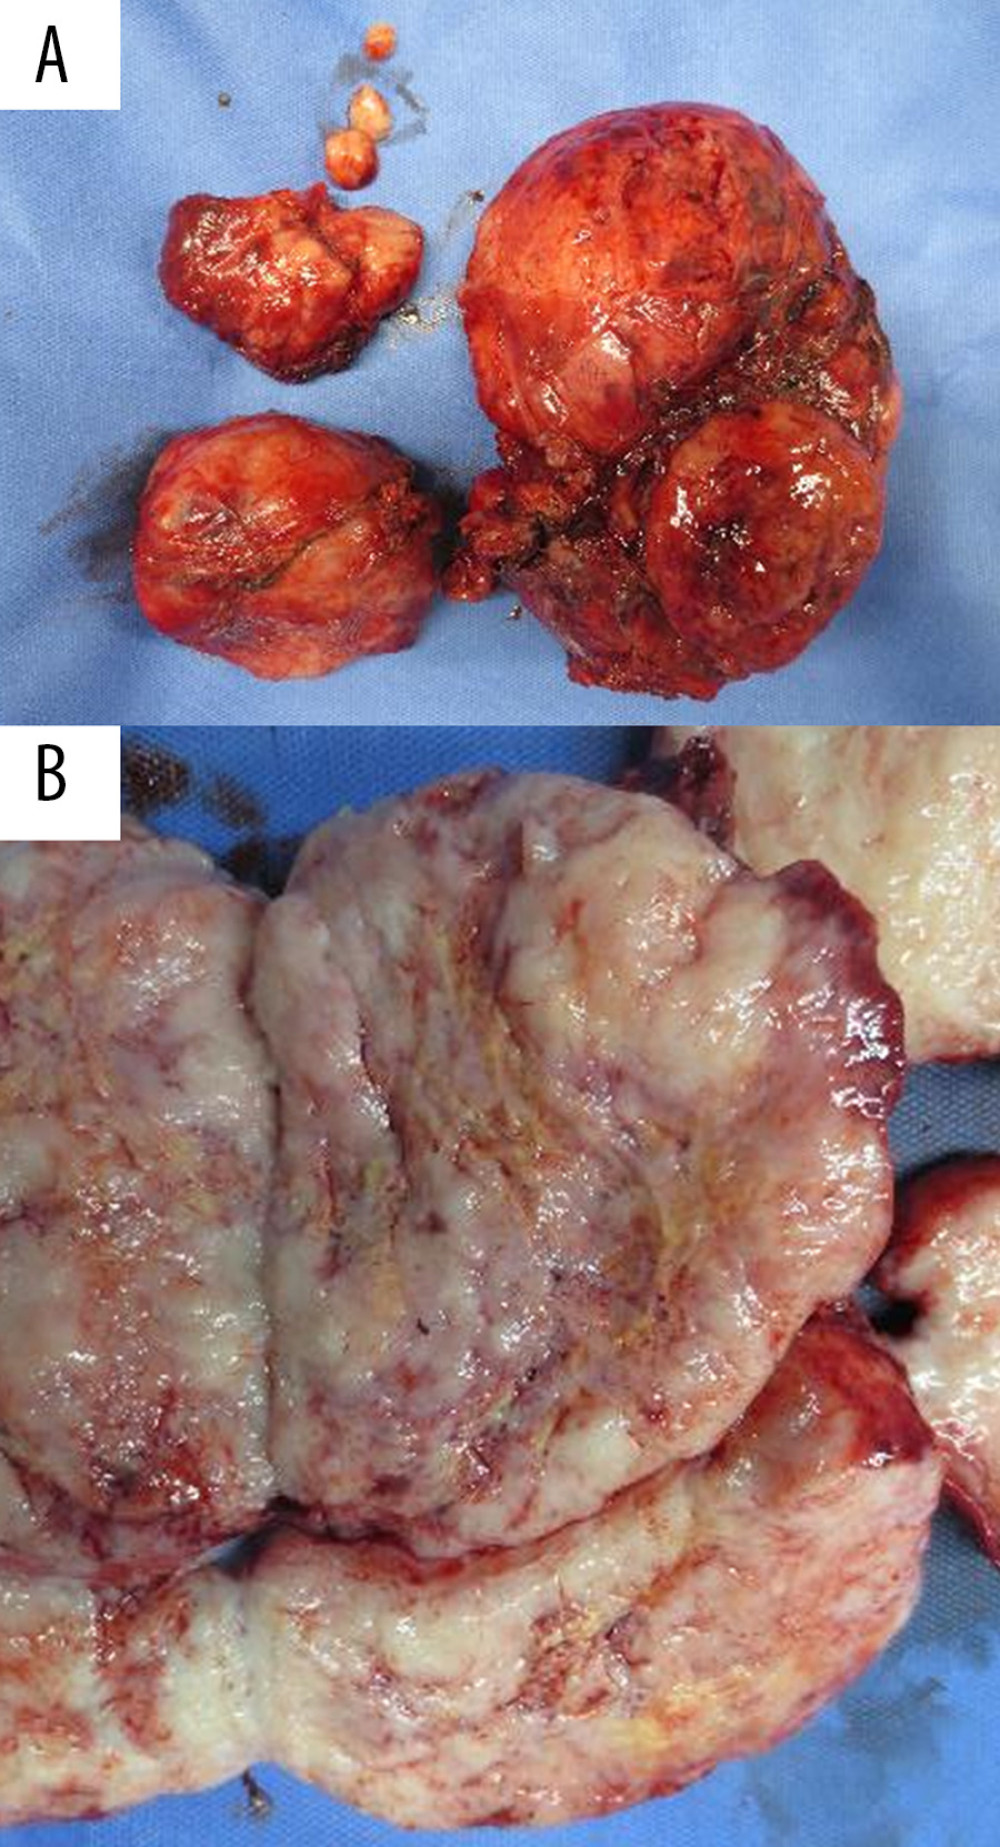 Resected specimens of the present surgery. (A) The resected tumors had fibrous capsules. (B) The cut surfaces were yellowish- to grayish-white in color.